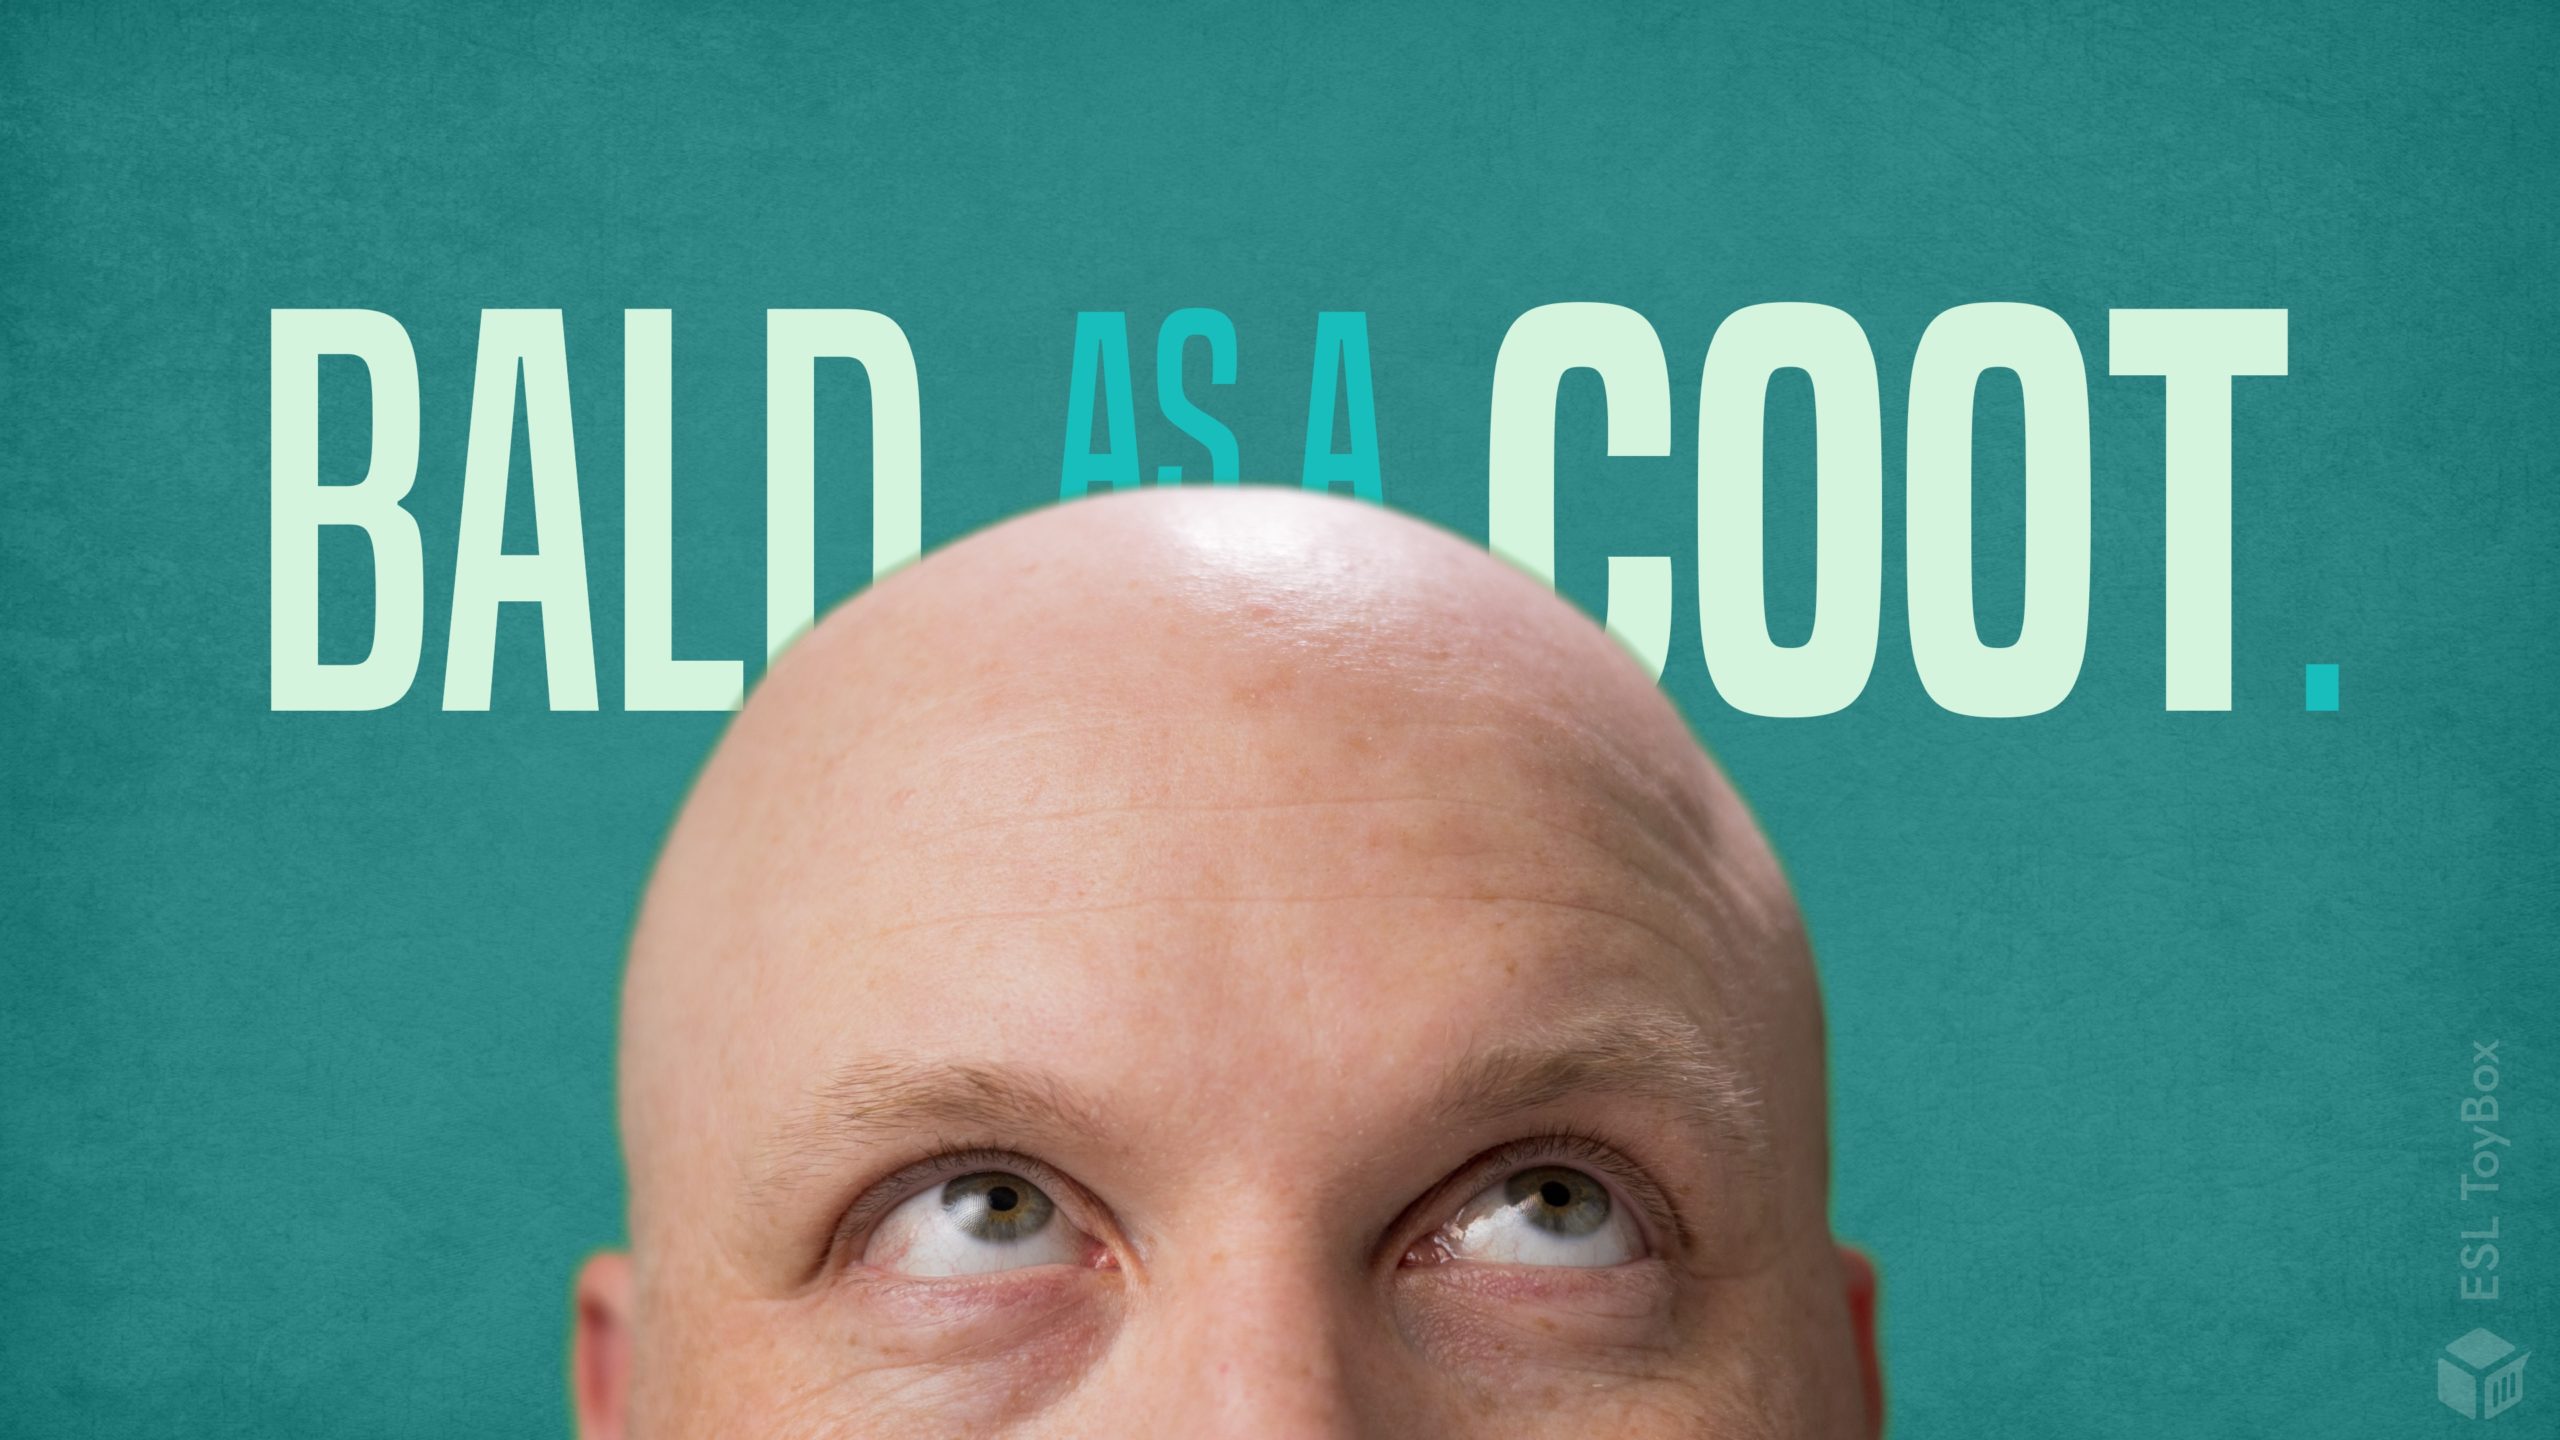 Bald as a Coot